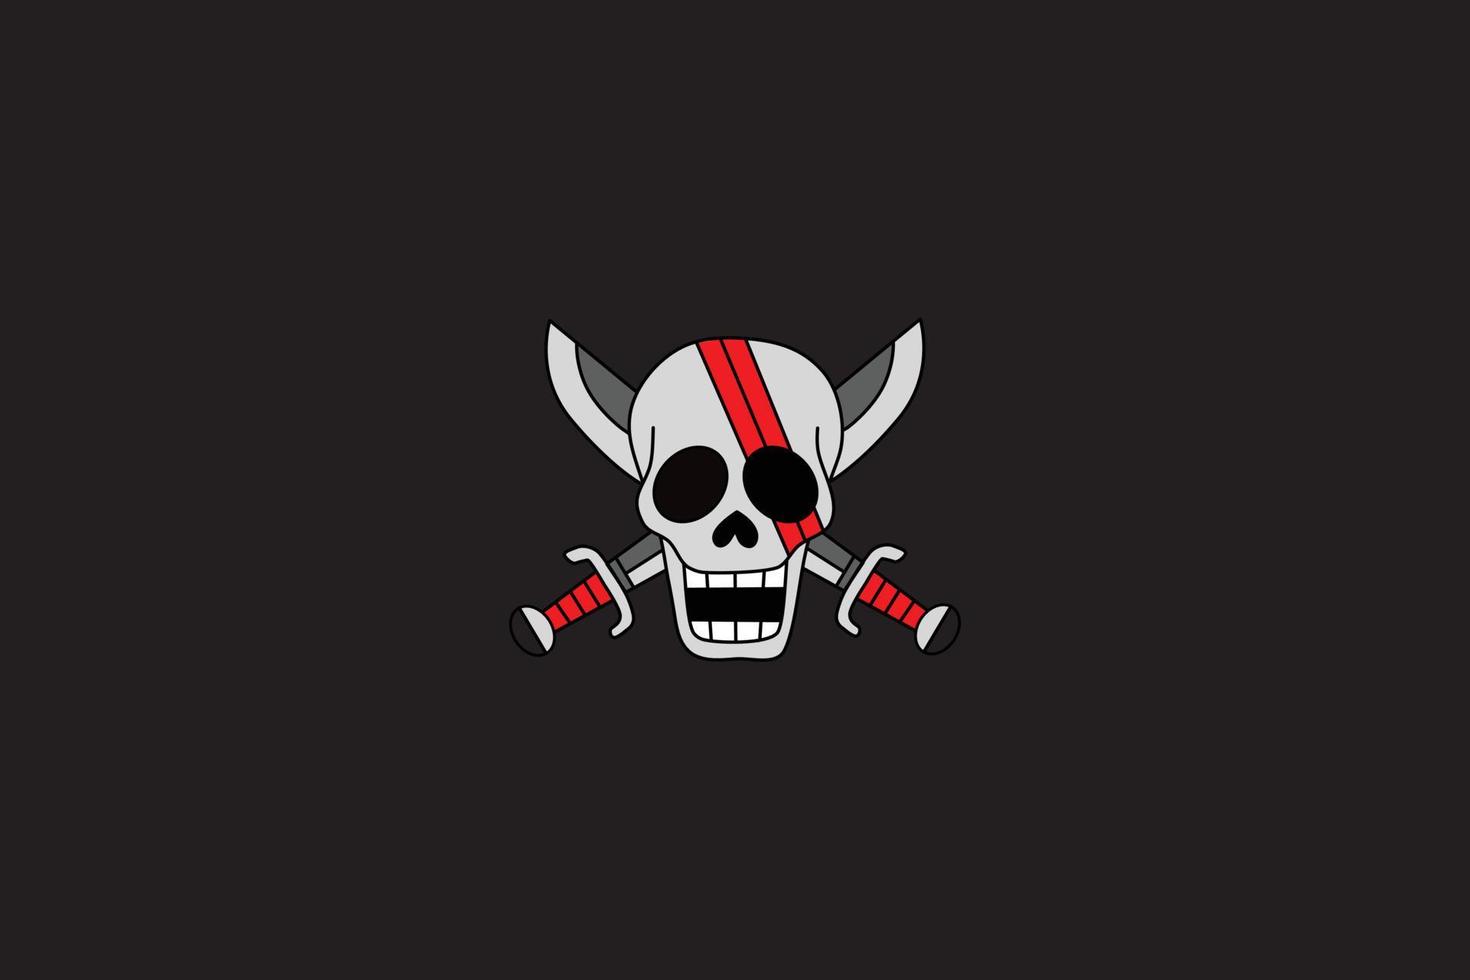 skull and cross blade as a pirate symbol in vector illustration design